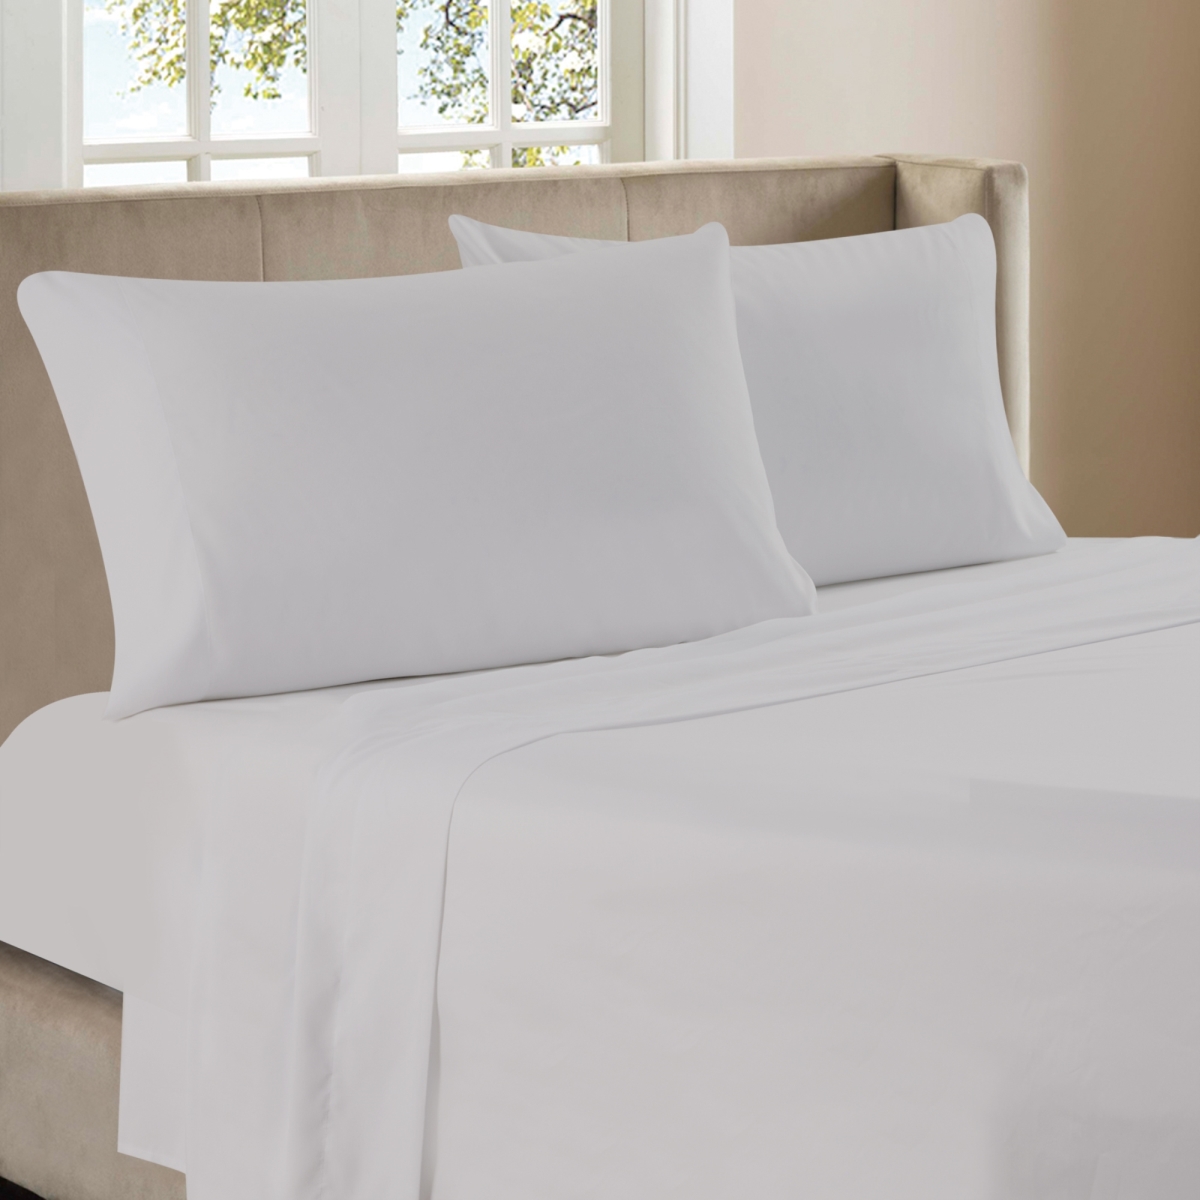 Whtx602-whq Microfiber Sheet Set, Solid White - Queen Size - 4 Piece